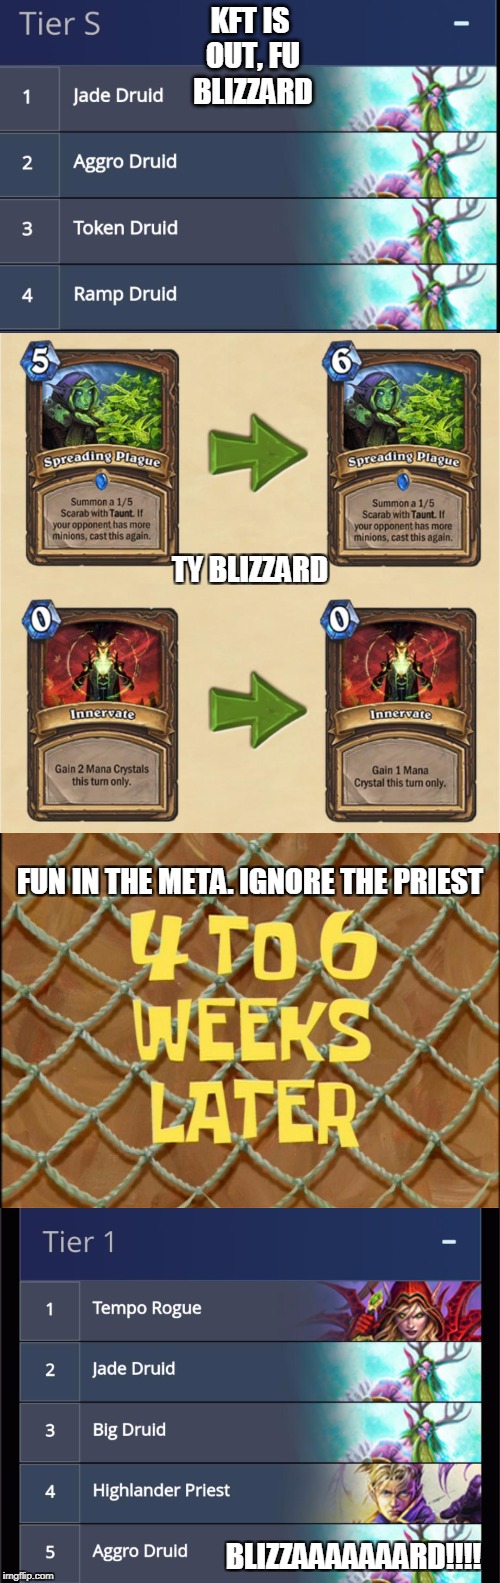 KFT IS OUT, FU BLIZZARD; TY BLIZZARD; FUN IN THE META. IGNORE THE PRIEST; BLIZZAAAAAAARD!!!! | image tagged in funny | made w/ Imgflip meme maker